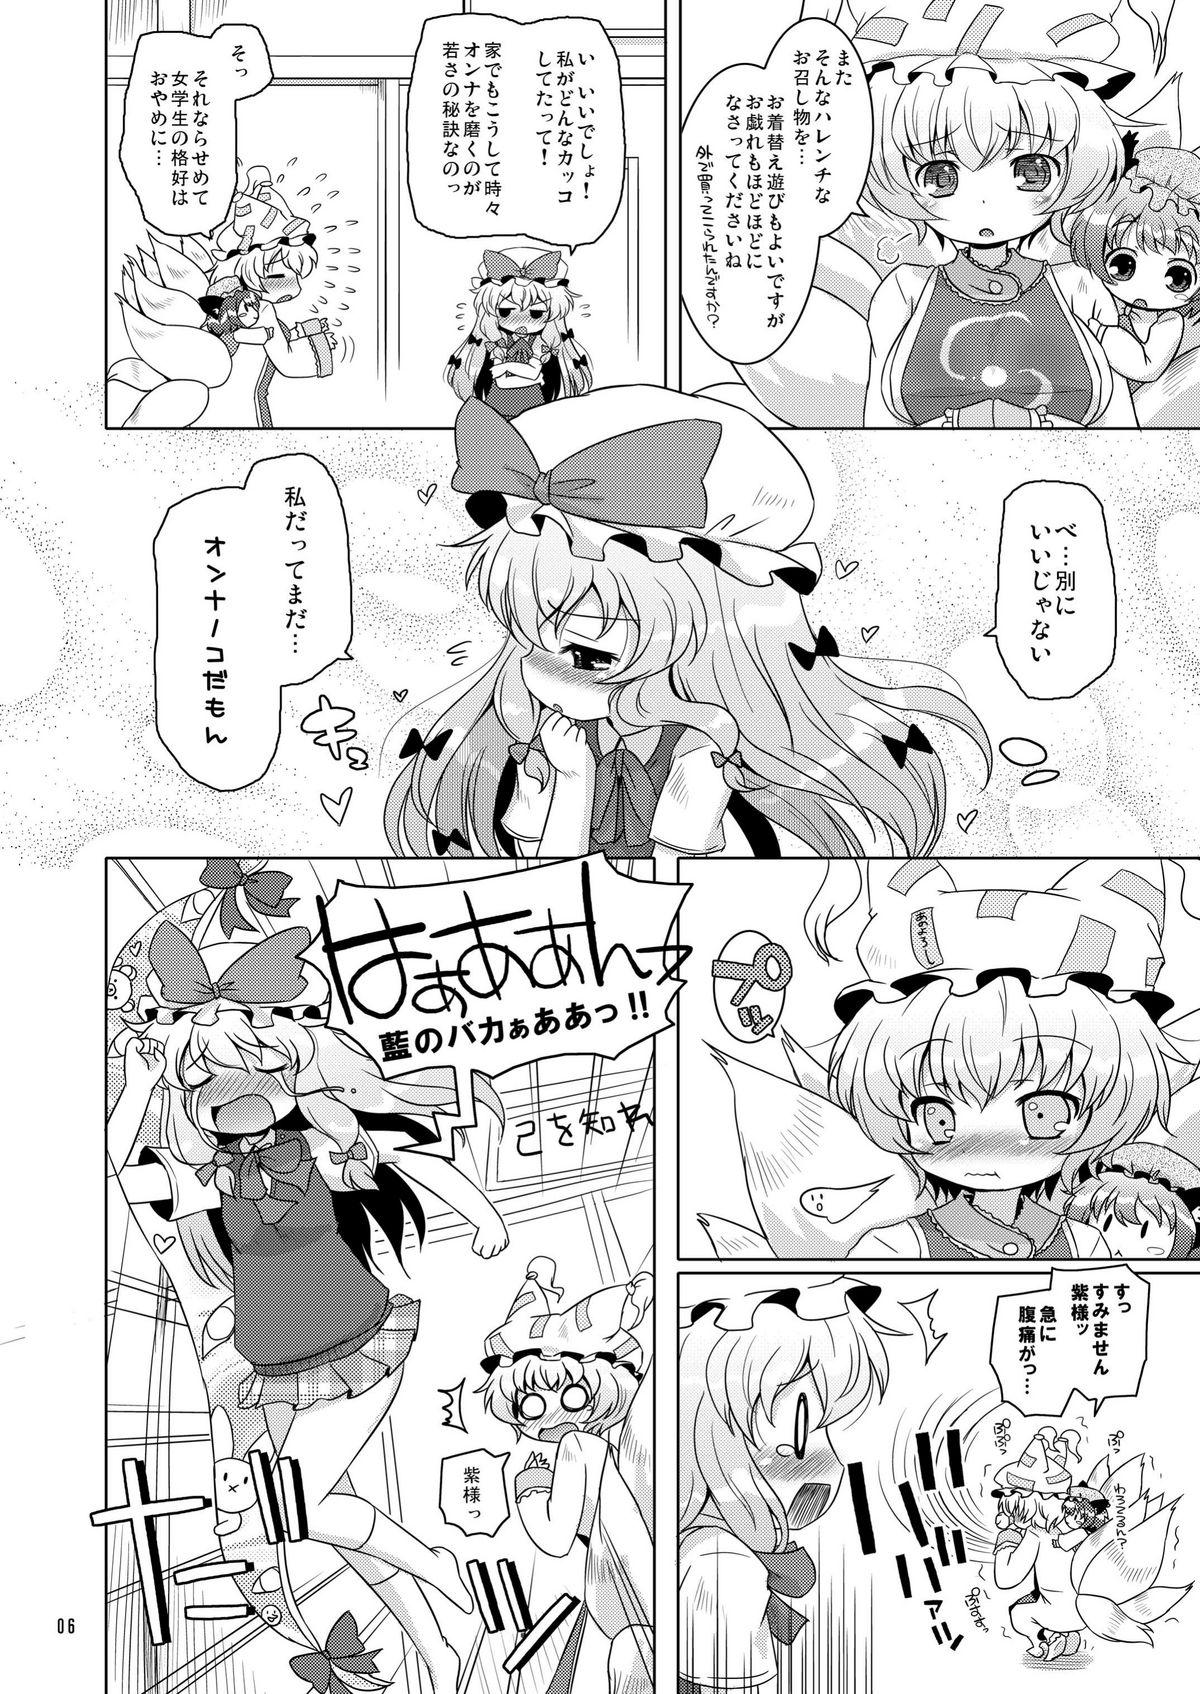 Hardcore Free Porn Love Me! Fancy Baby Doll - Touhou project Kinky - Page 6